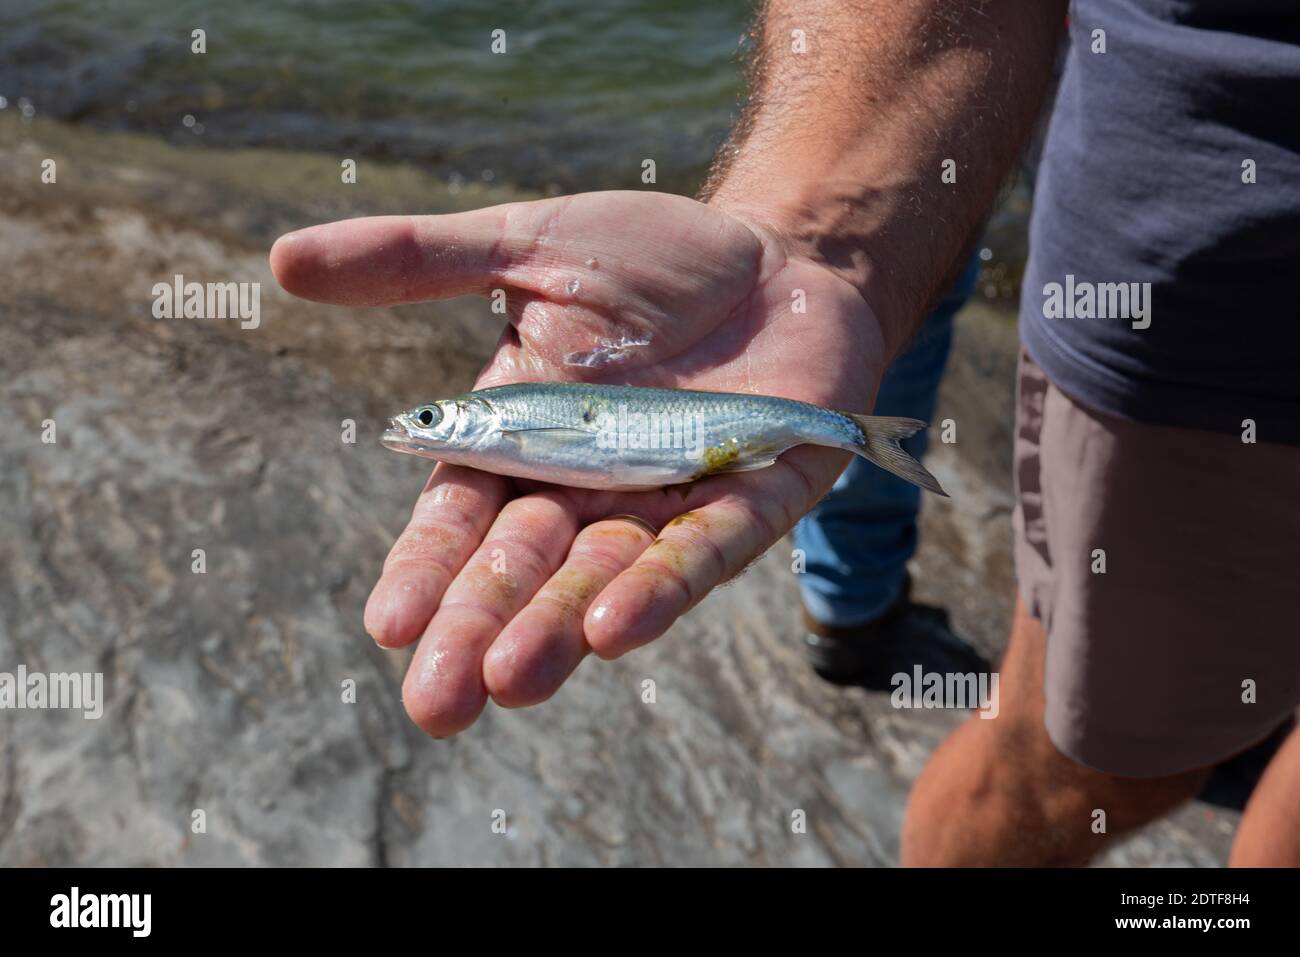 Fisherman showing a fish in his hand up close Stock Photo